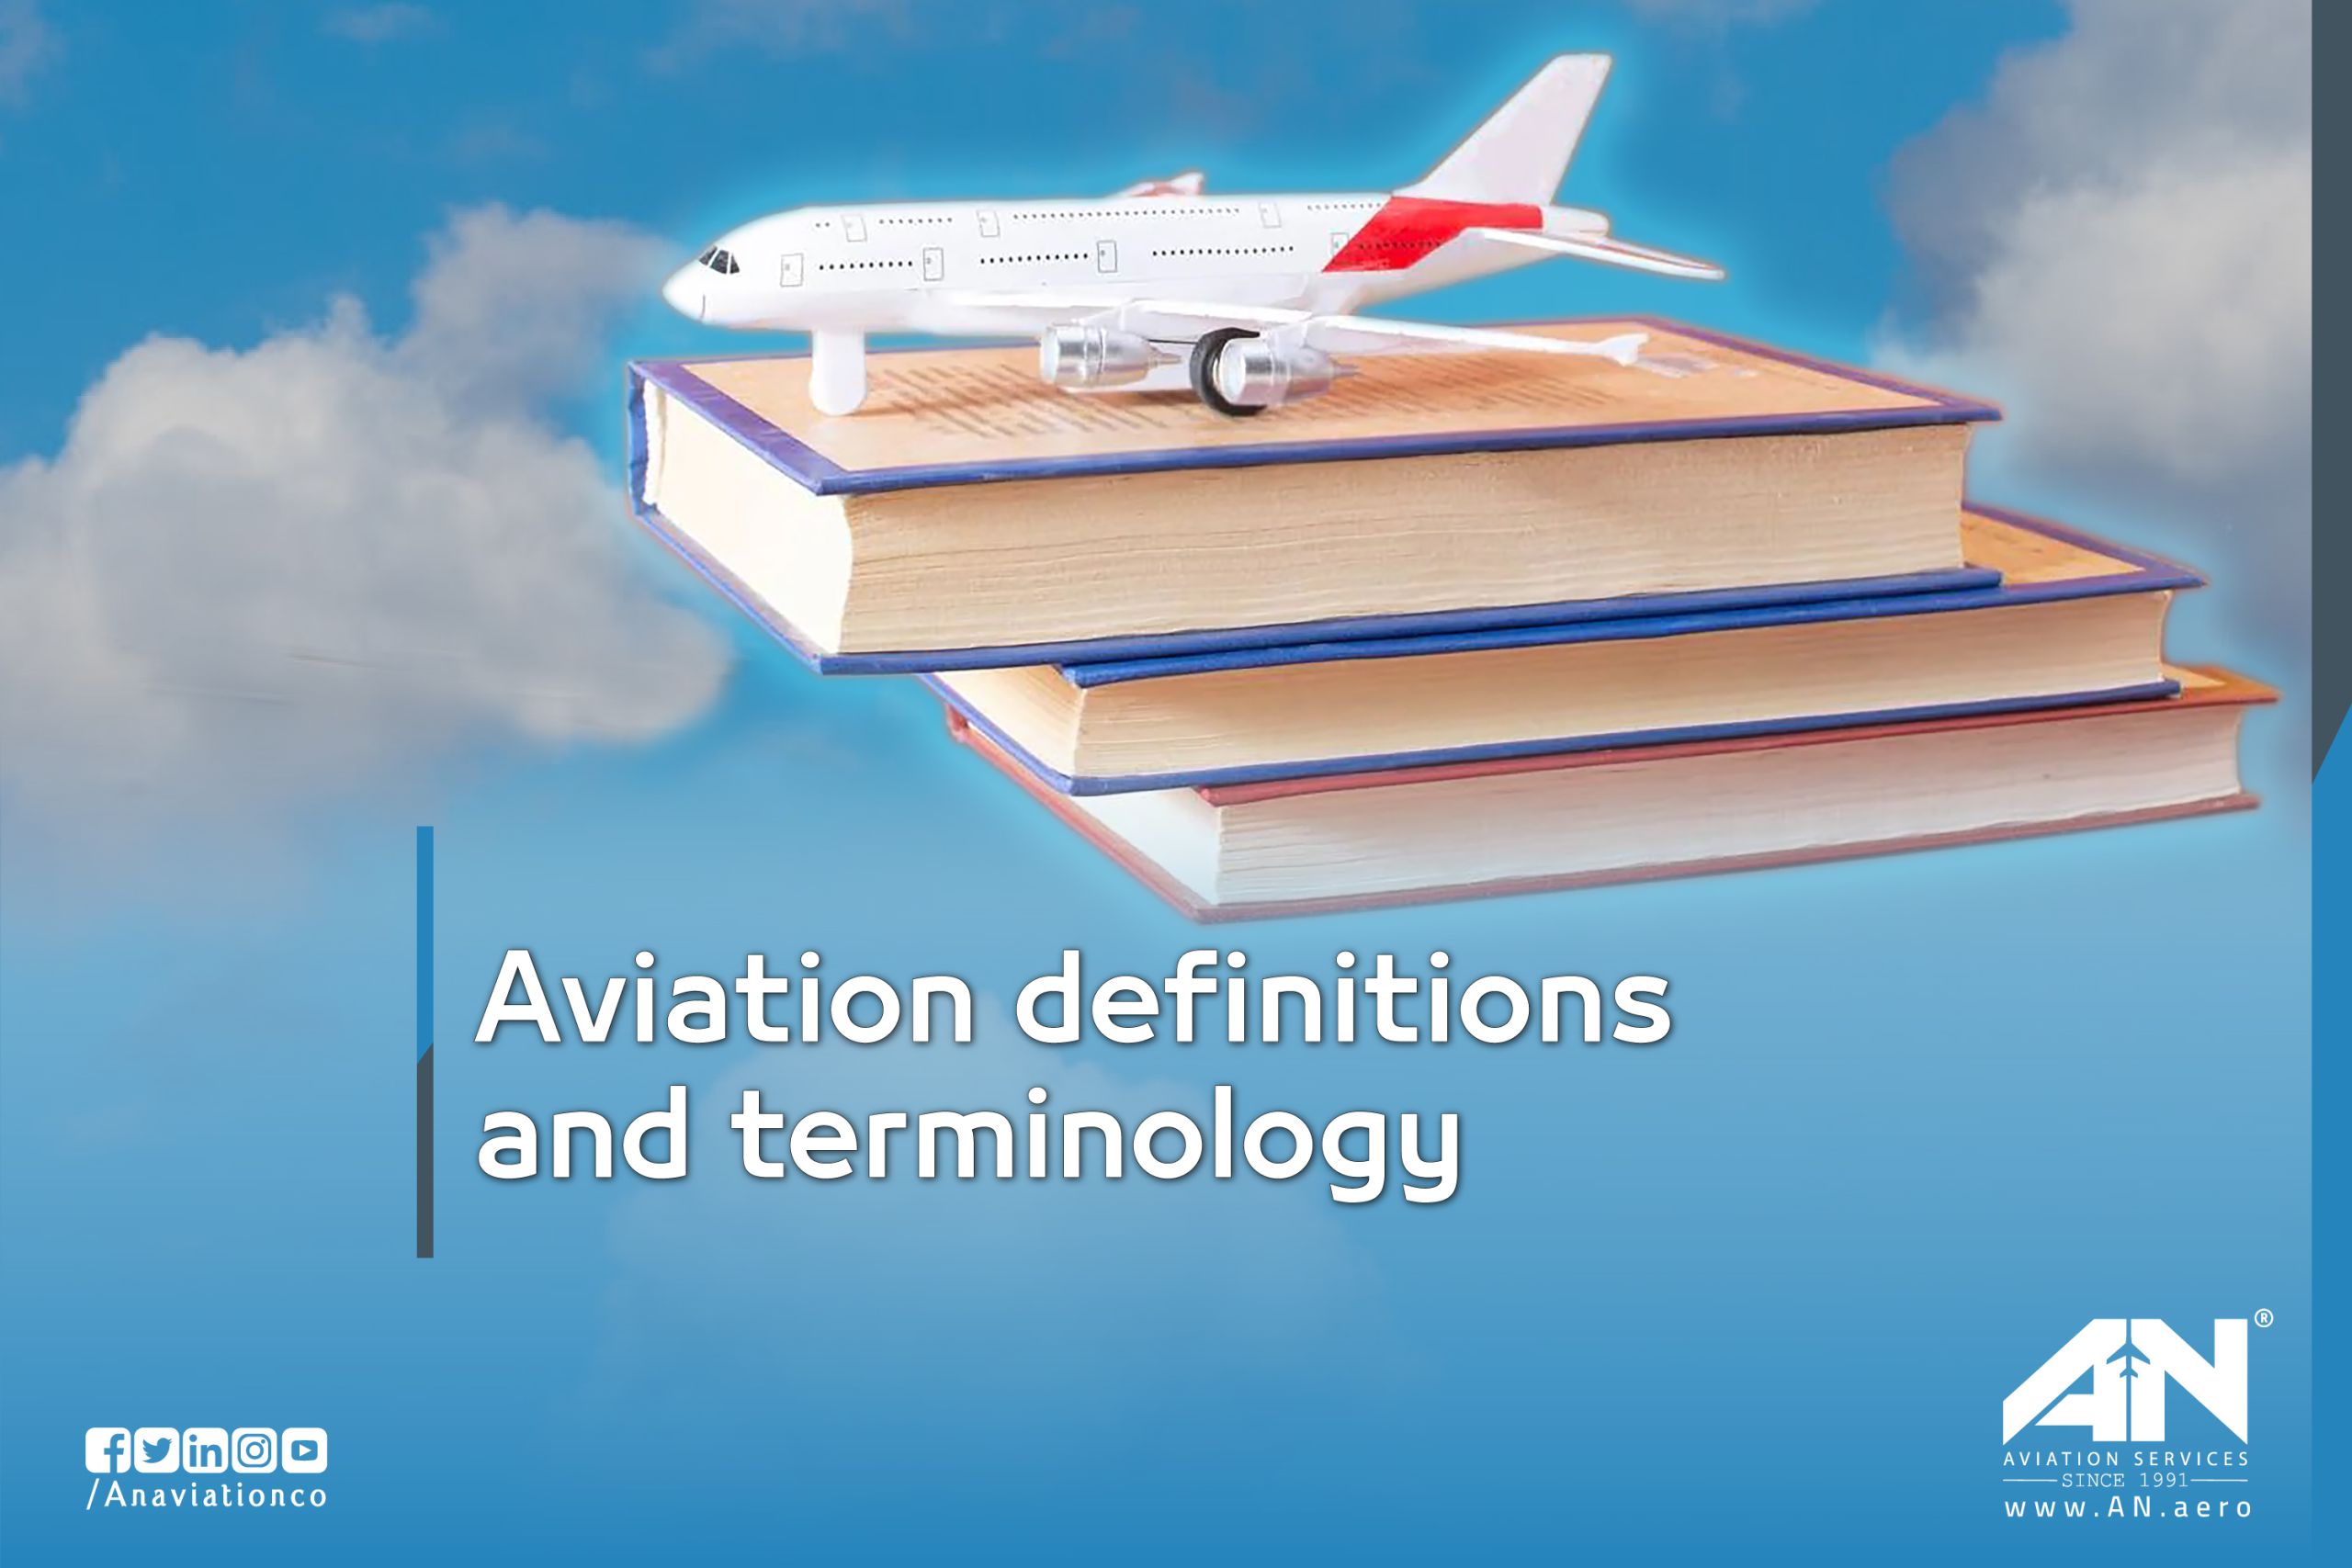 Aviation terminology - Terms and definitions complete guide